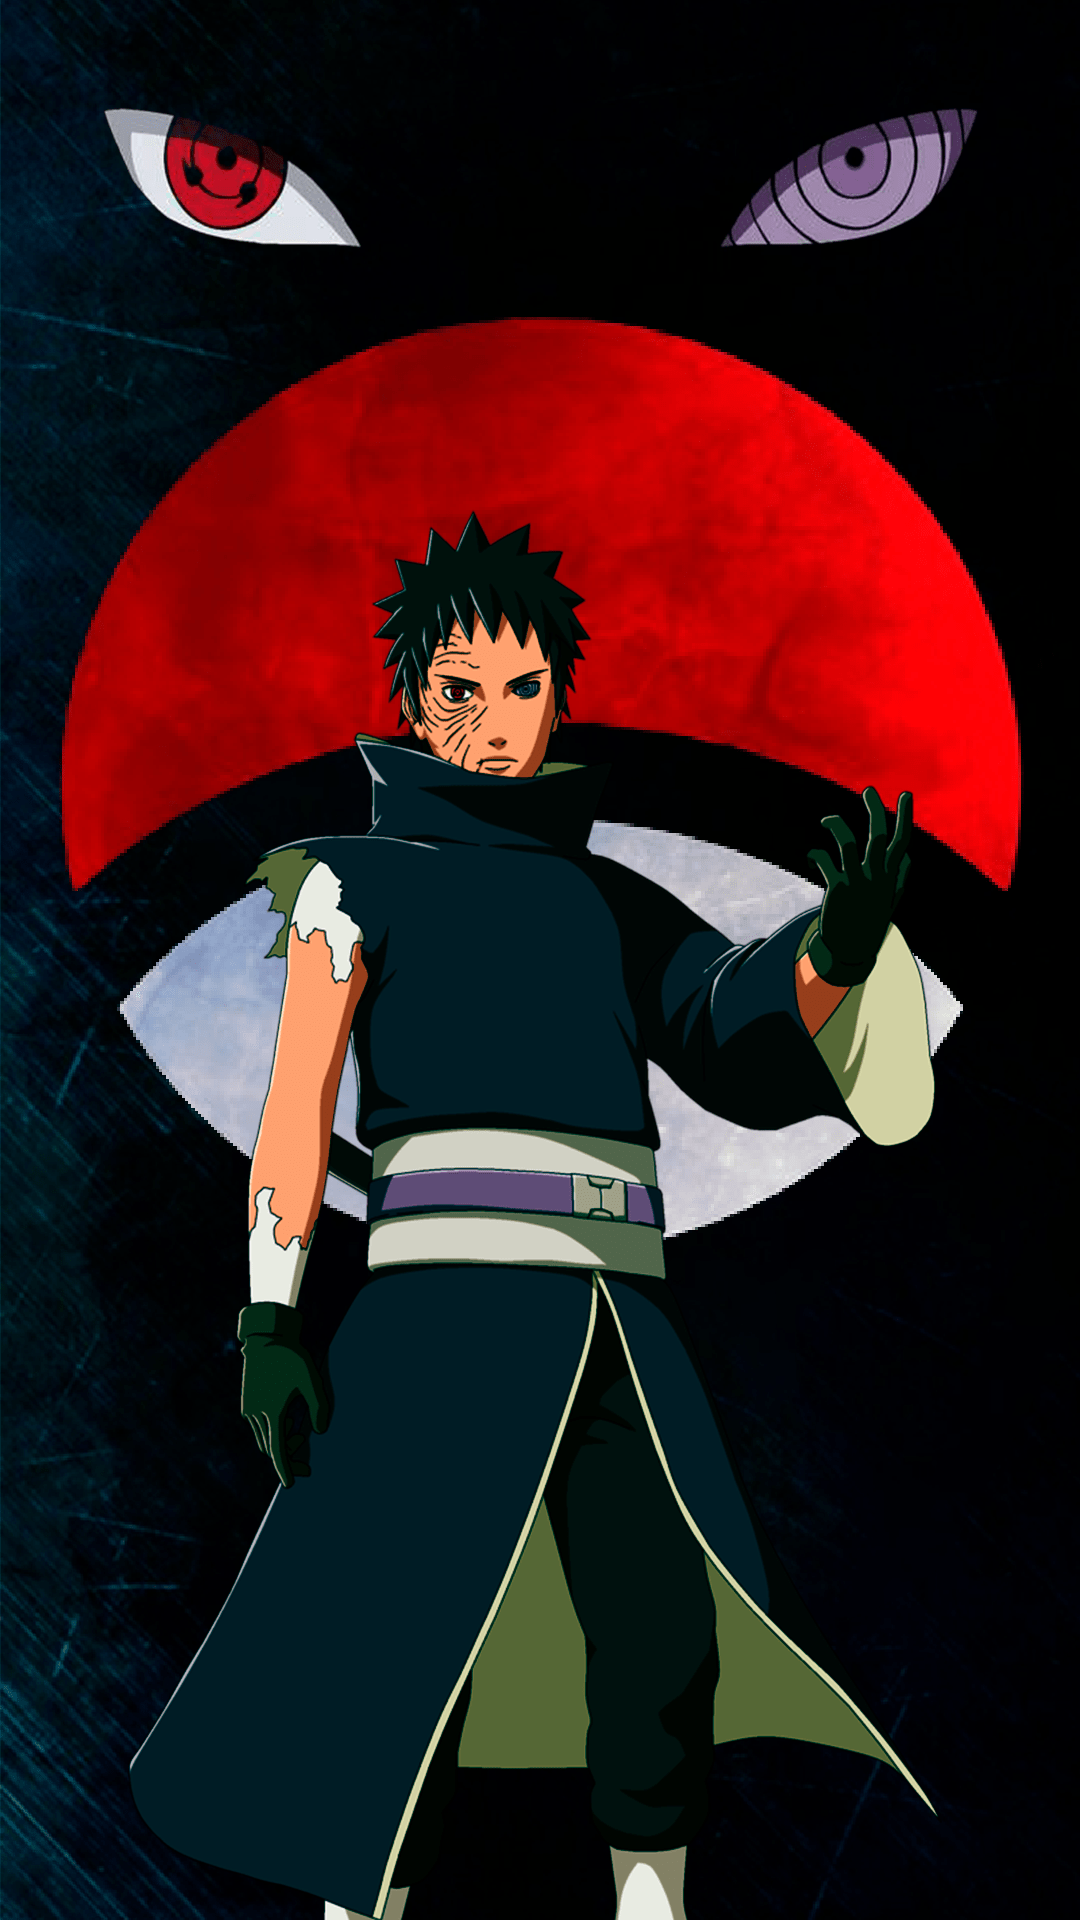 Obito Uchiha Wallpaper 4K for Android - Download